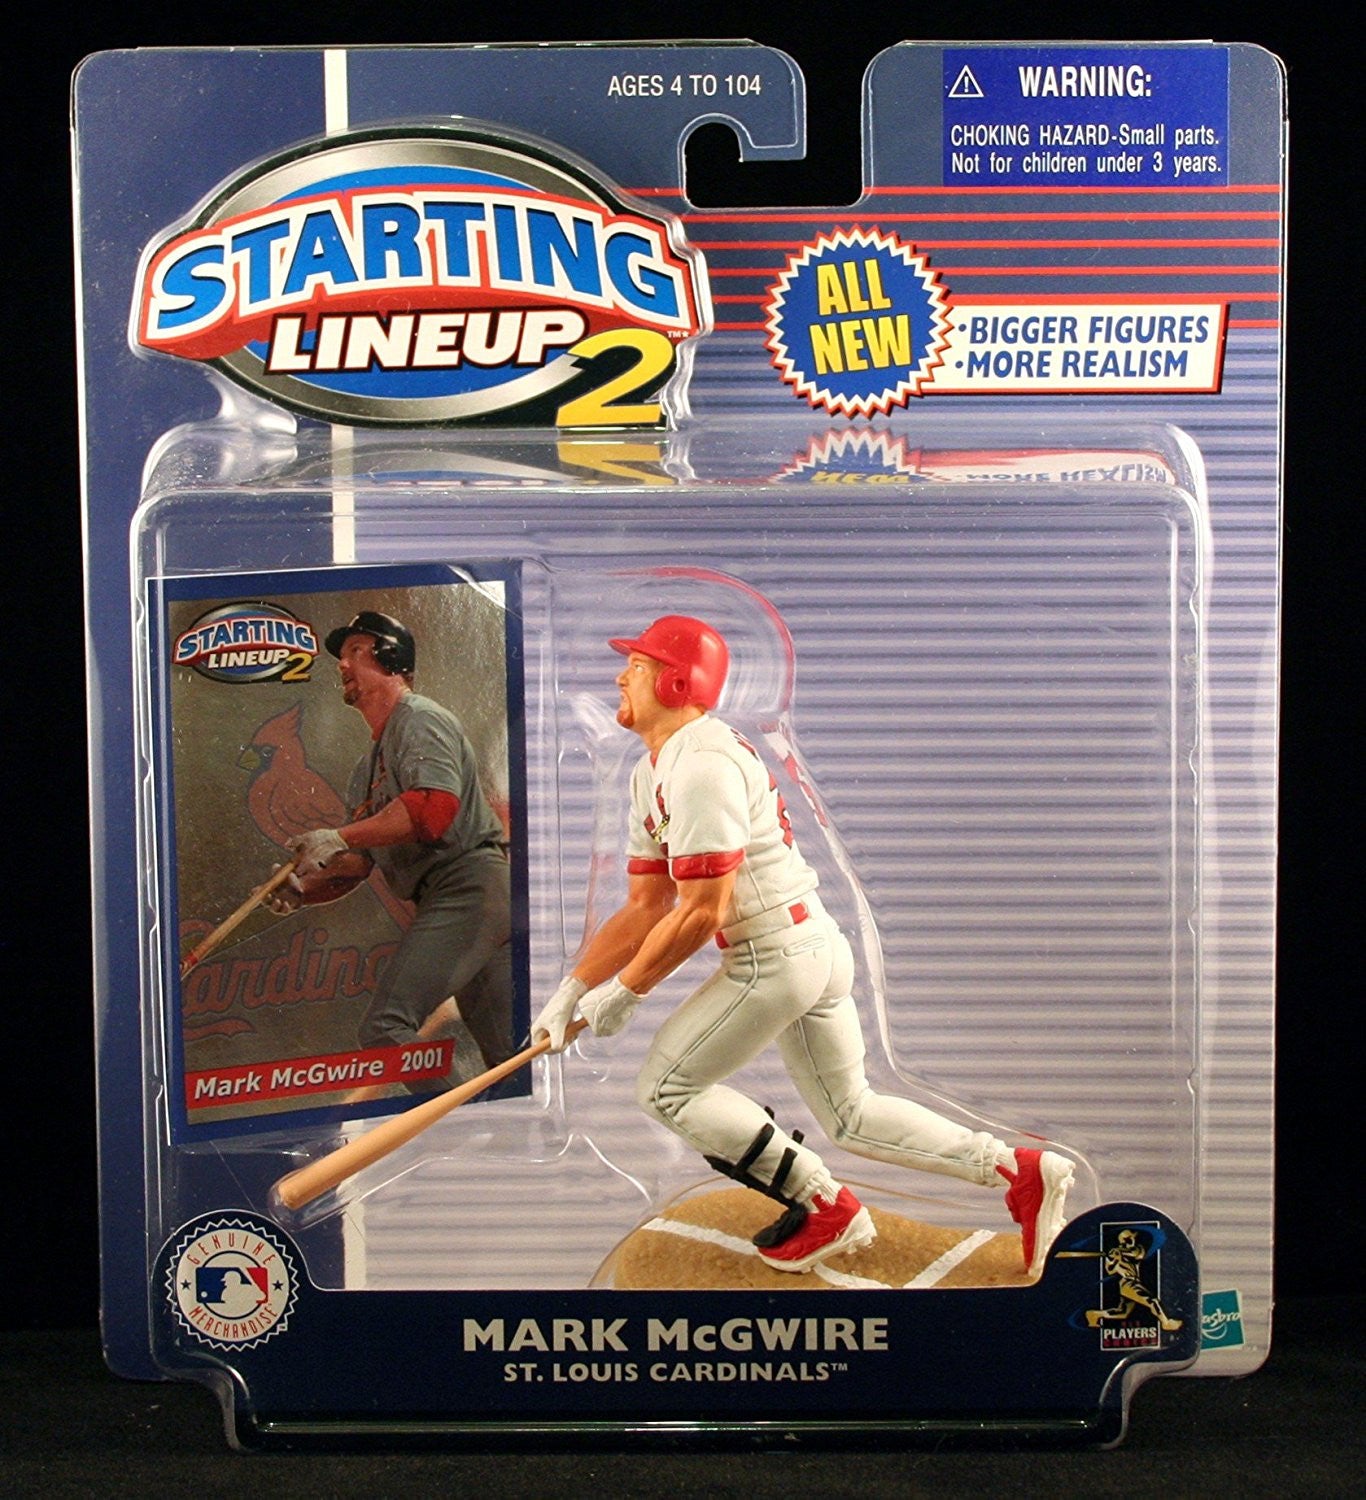 MARK MCGWIRE / ST. LOUIS CARDINALS 2001 MLB Starting Lineup 2 Action Figure & Exclusive Trading Card